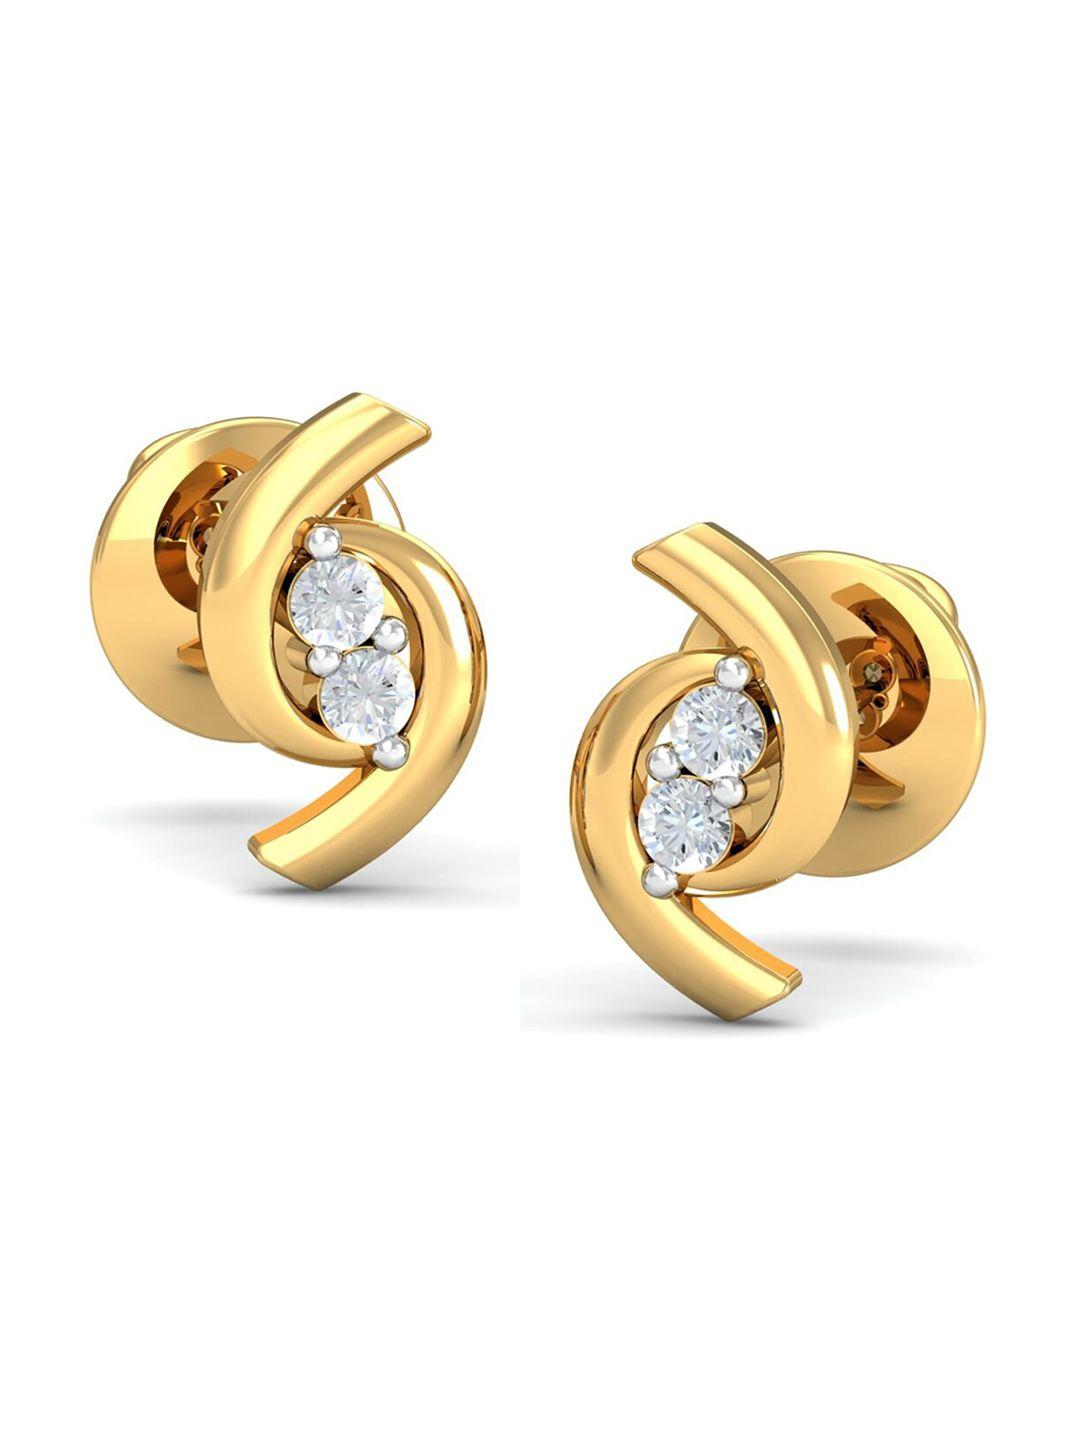 kuberbox-clasping-palms-18kt-gold-diamond-studded-earrings---1.44gm